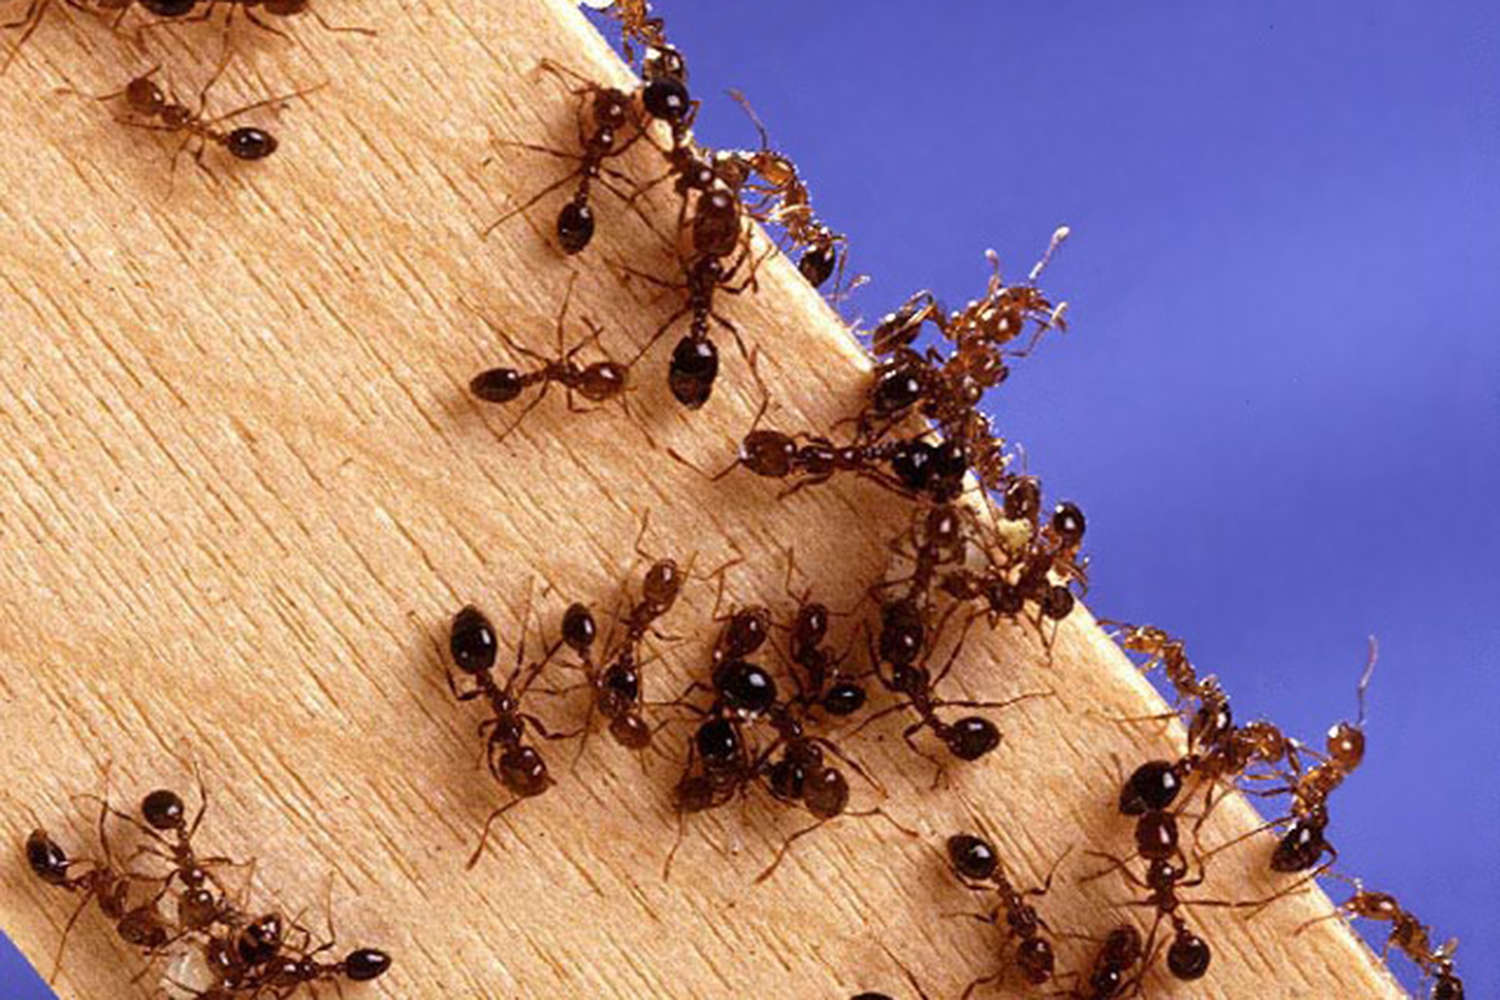 Scientists have shown that ants behave like a neural network